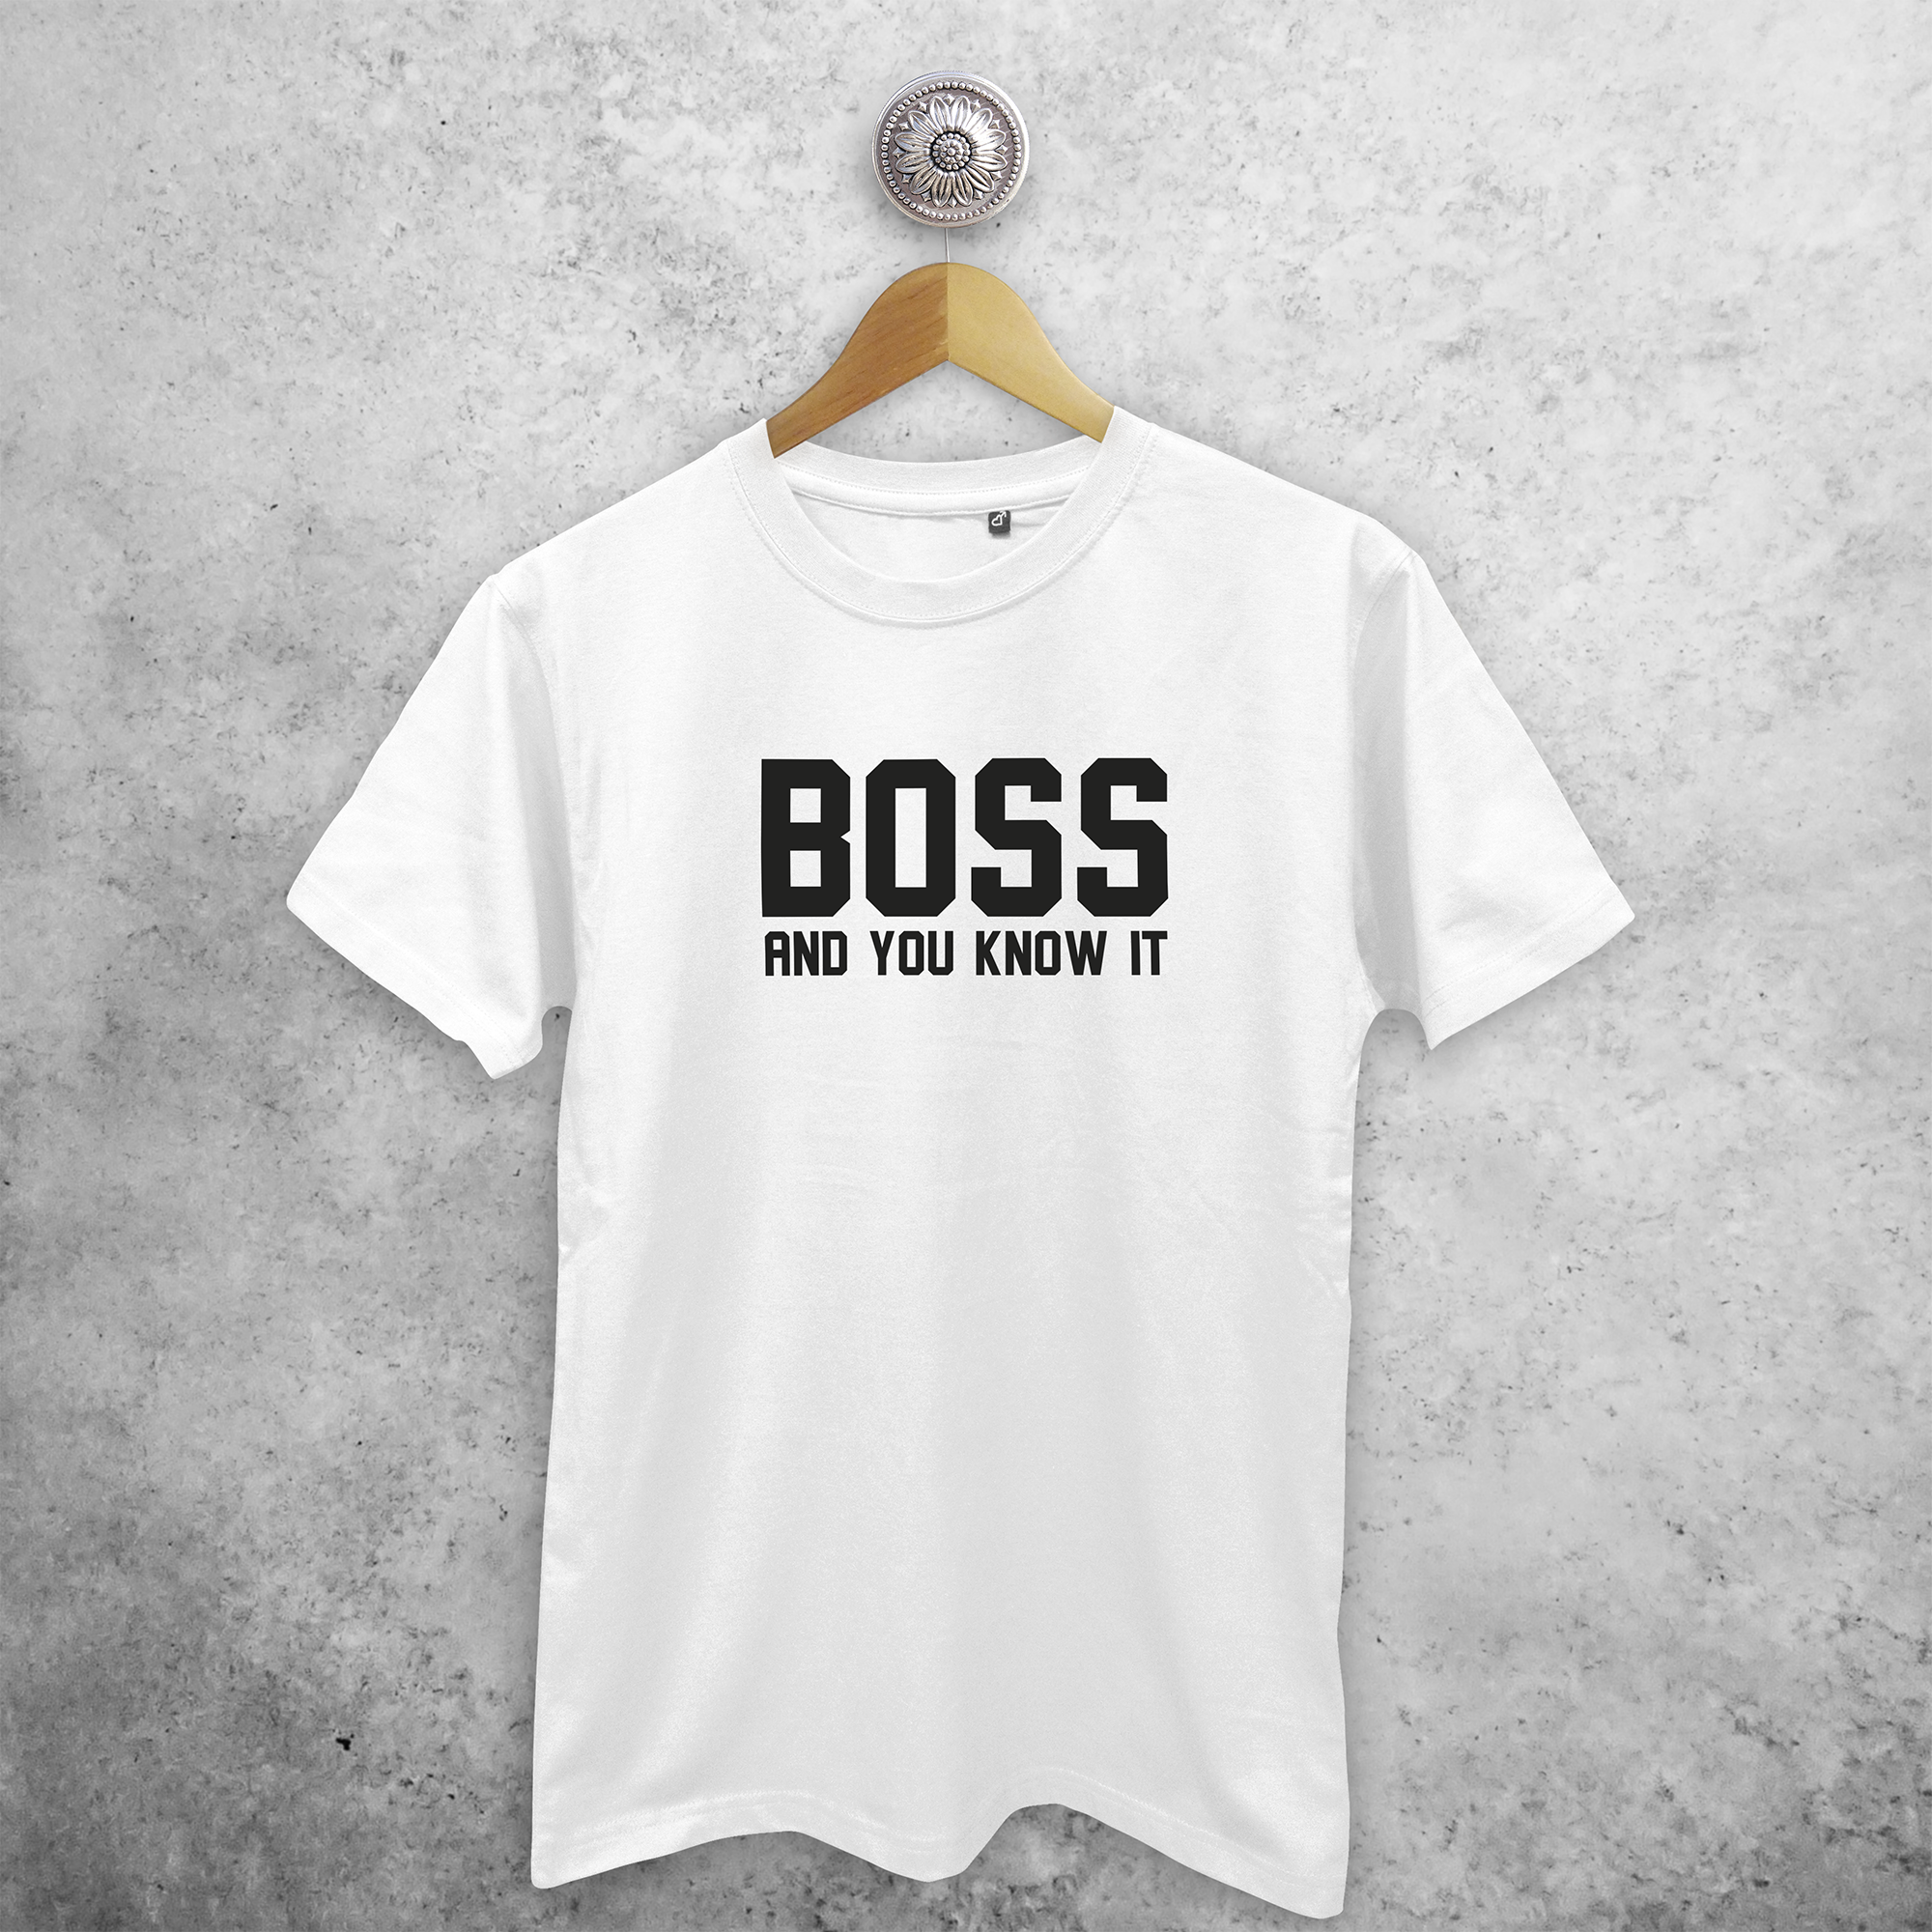 'Boss and you know it' adult shirt